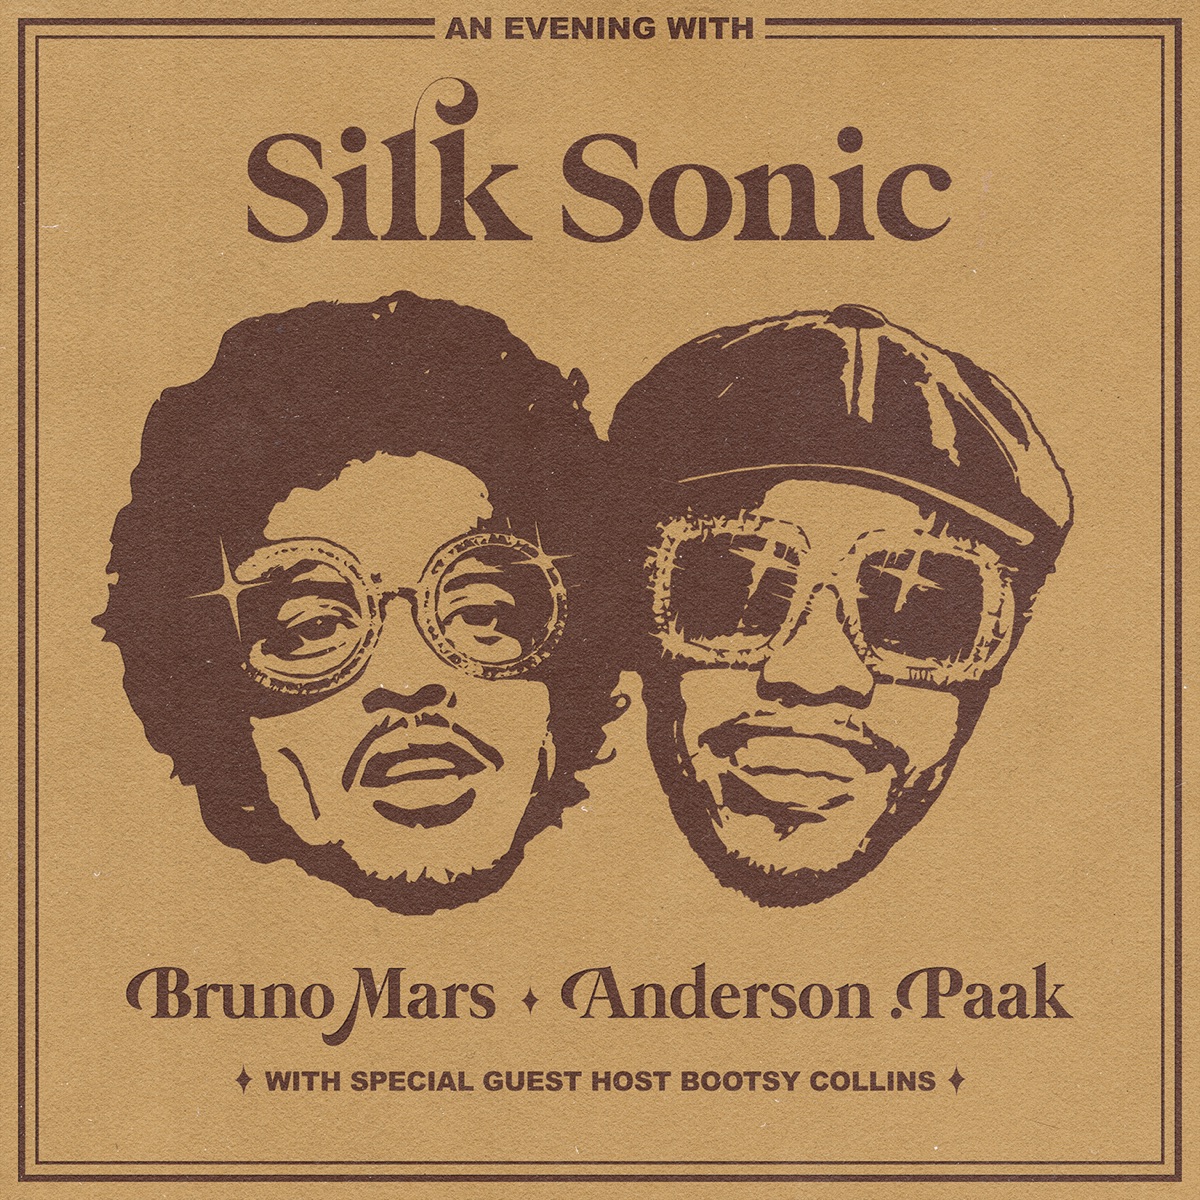 Cover art for『Bruno Mars, Anderson .Paak, Silk Sonic - Fly As Me』from the release『An Evening With Silk Sonic 』